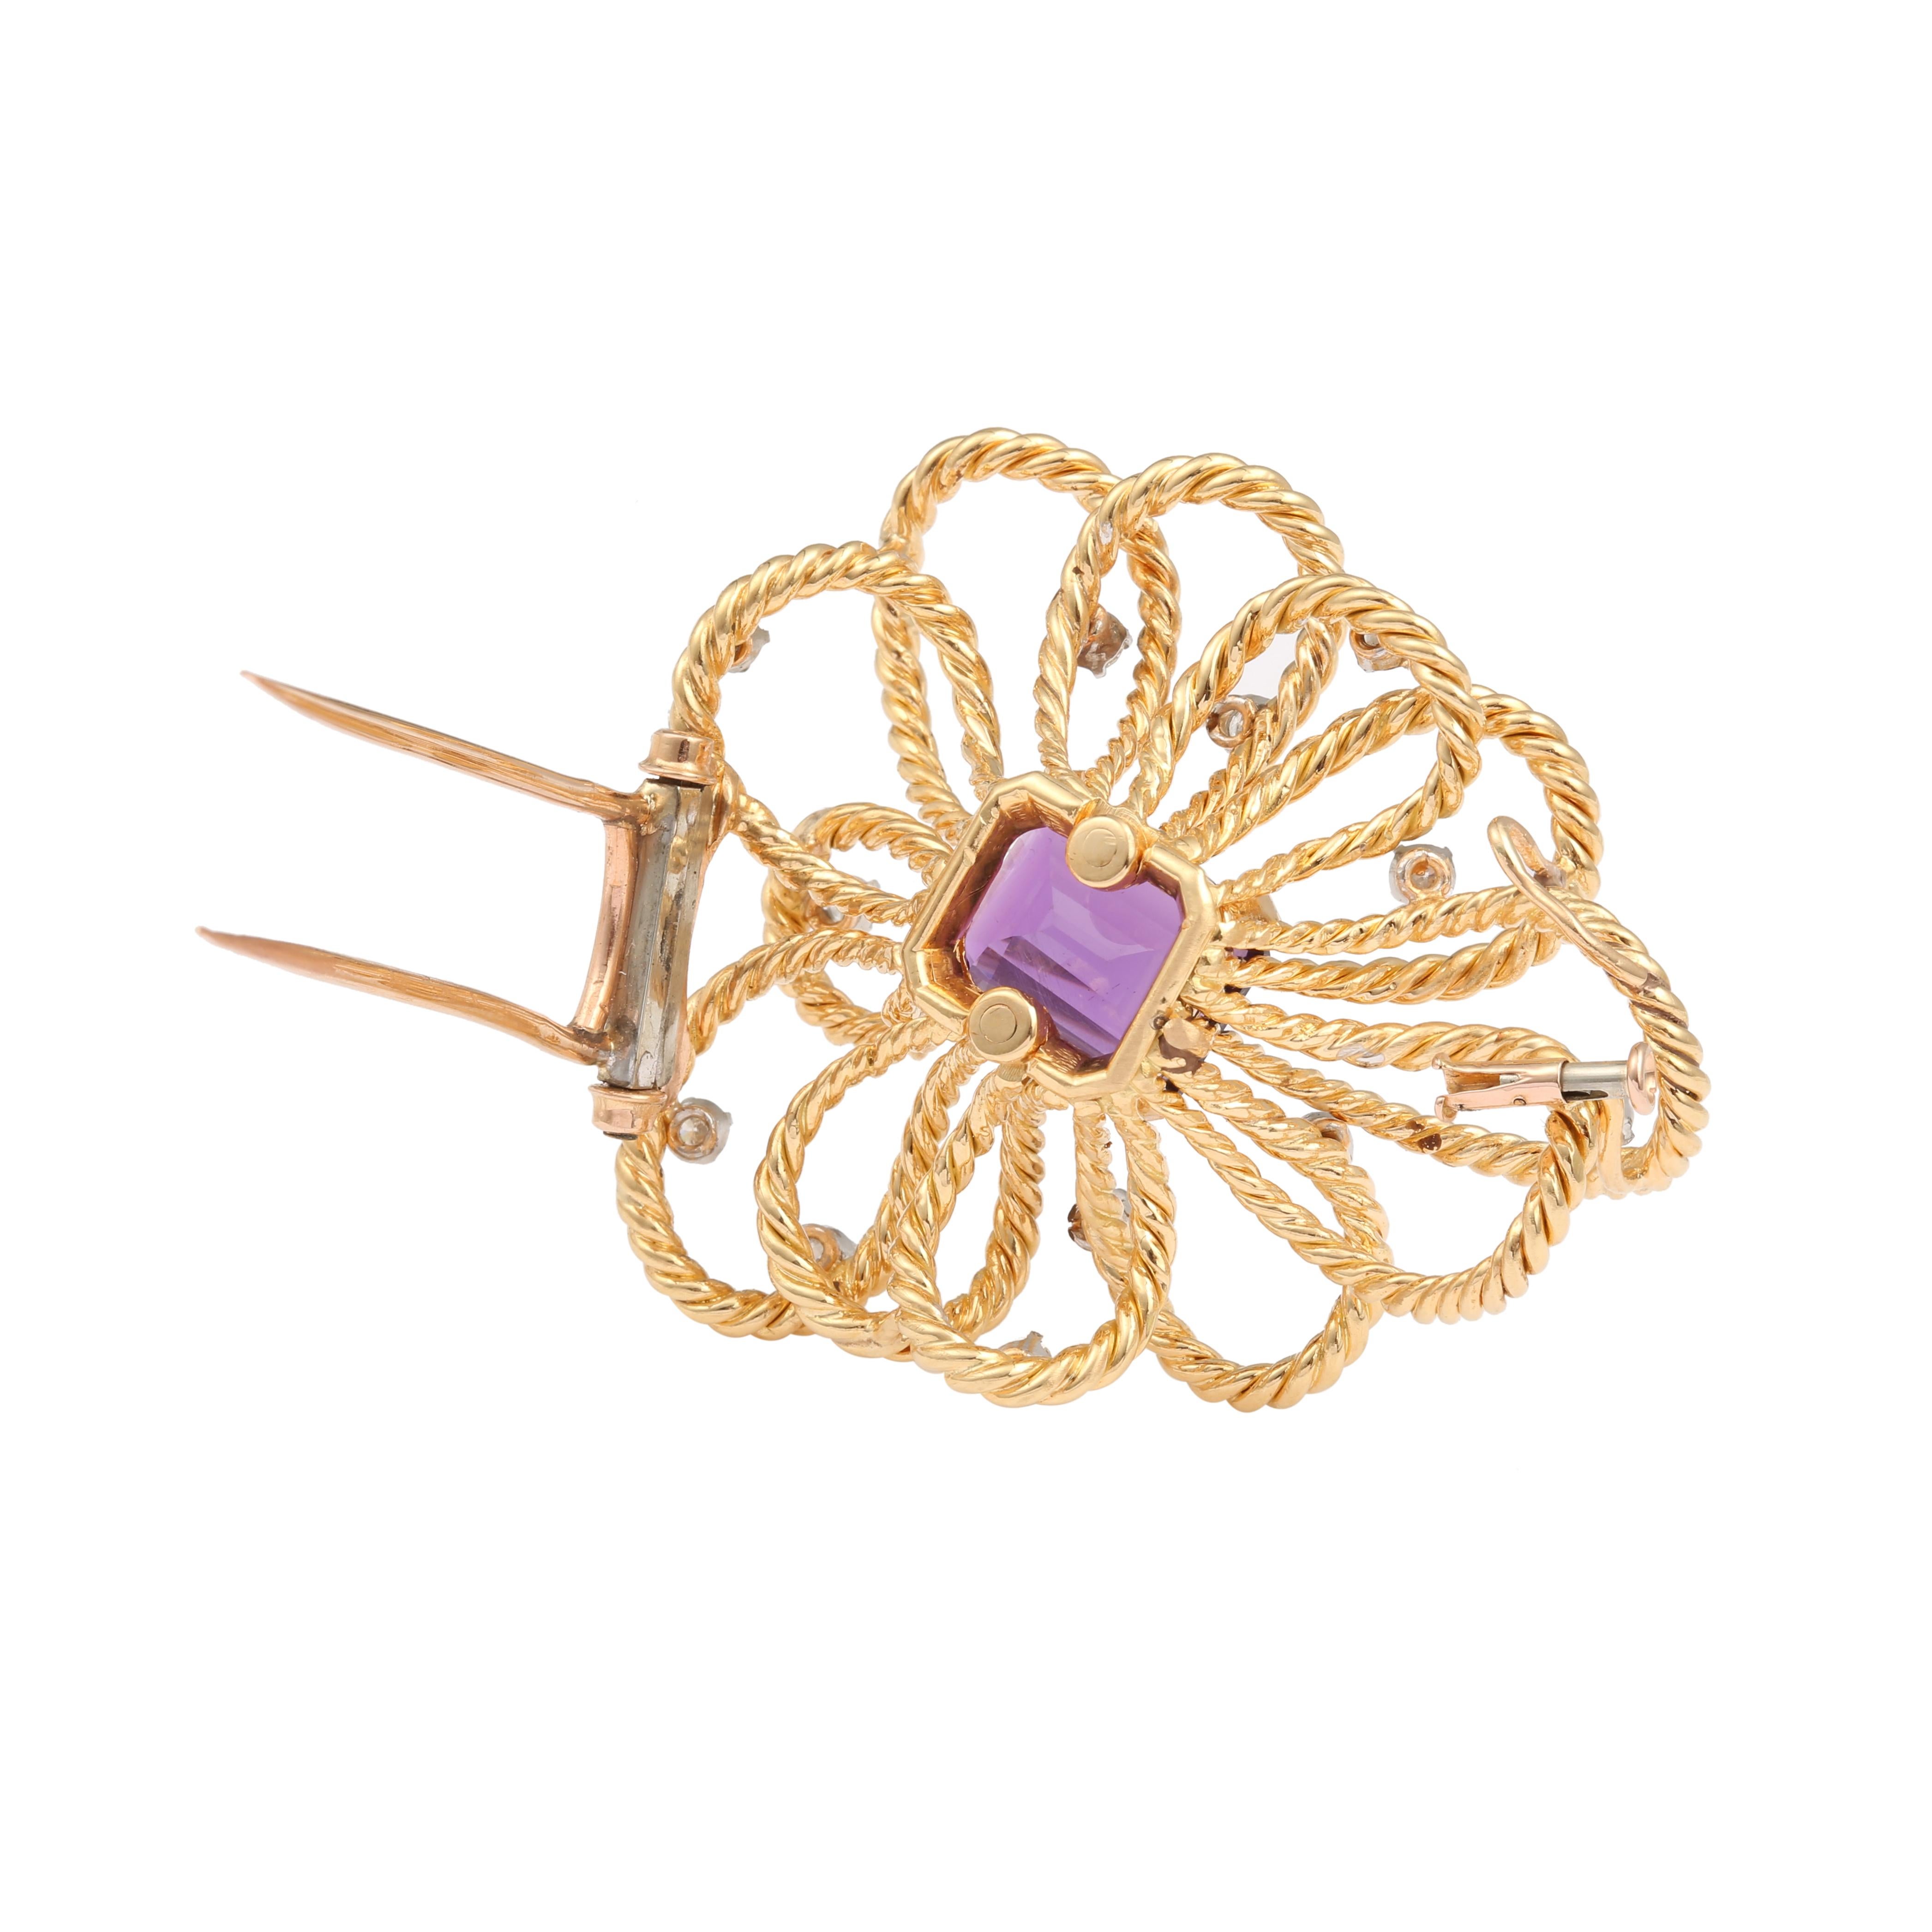 Magnificent flower brooch signed Boucheron set with a central emerald cut amethyst and 12 small round brilliant cut diamonds, mounted on twisted yellow gold.

Estimated weight of the central amethyst : 4.43 carats

Total estimated weight of